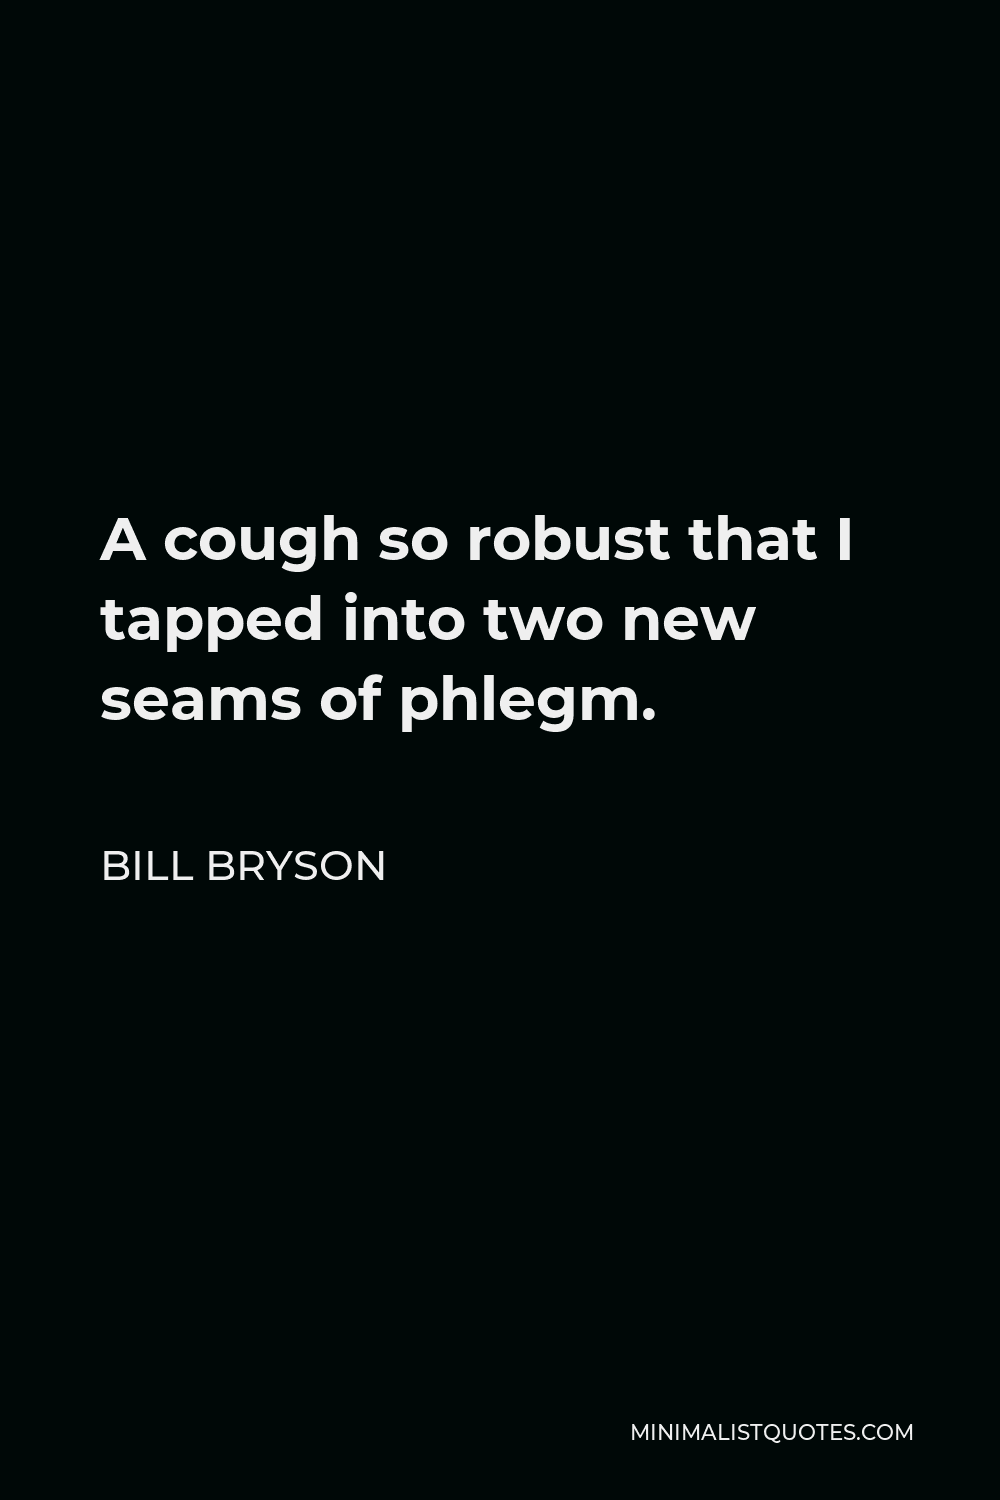 Bill Bryson Quote - A cough so robust that I tapped into two new seams of phlegm.